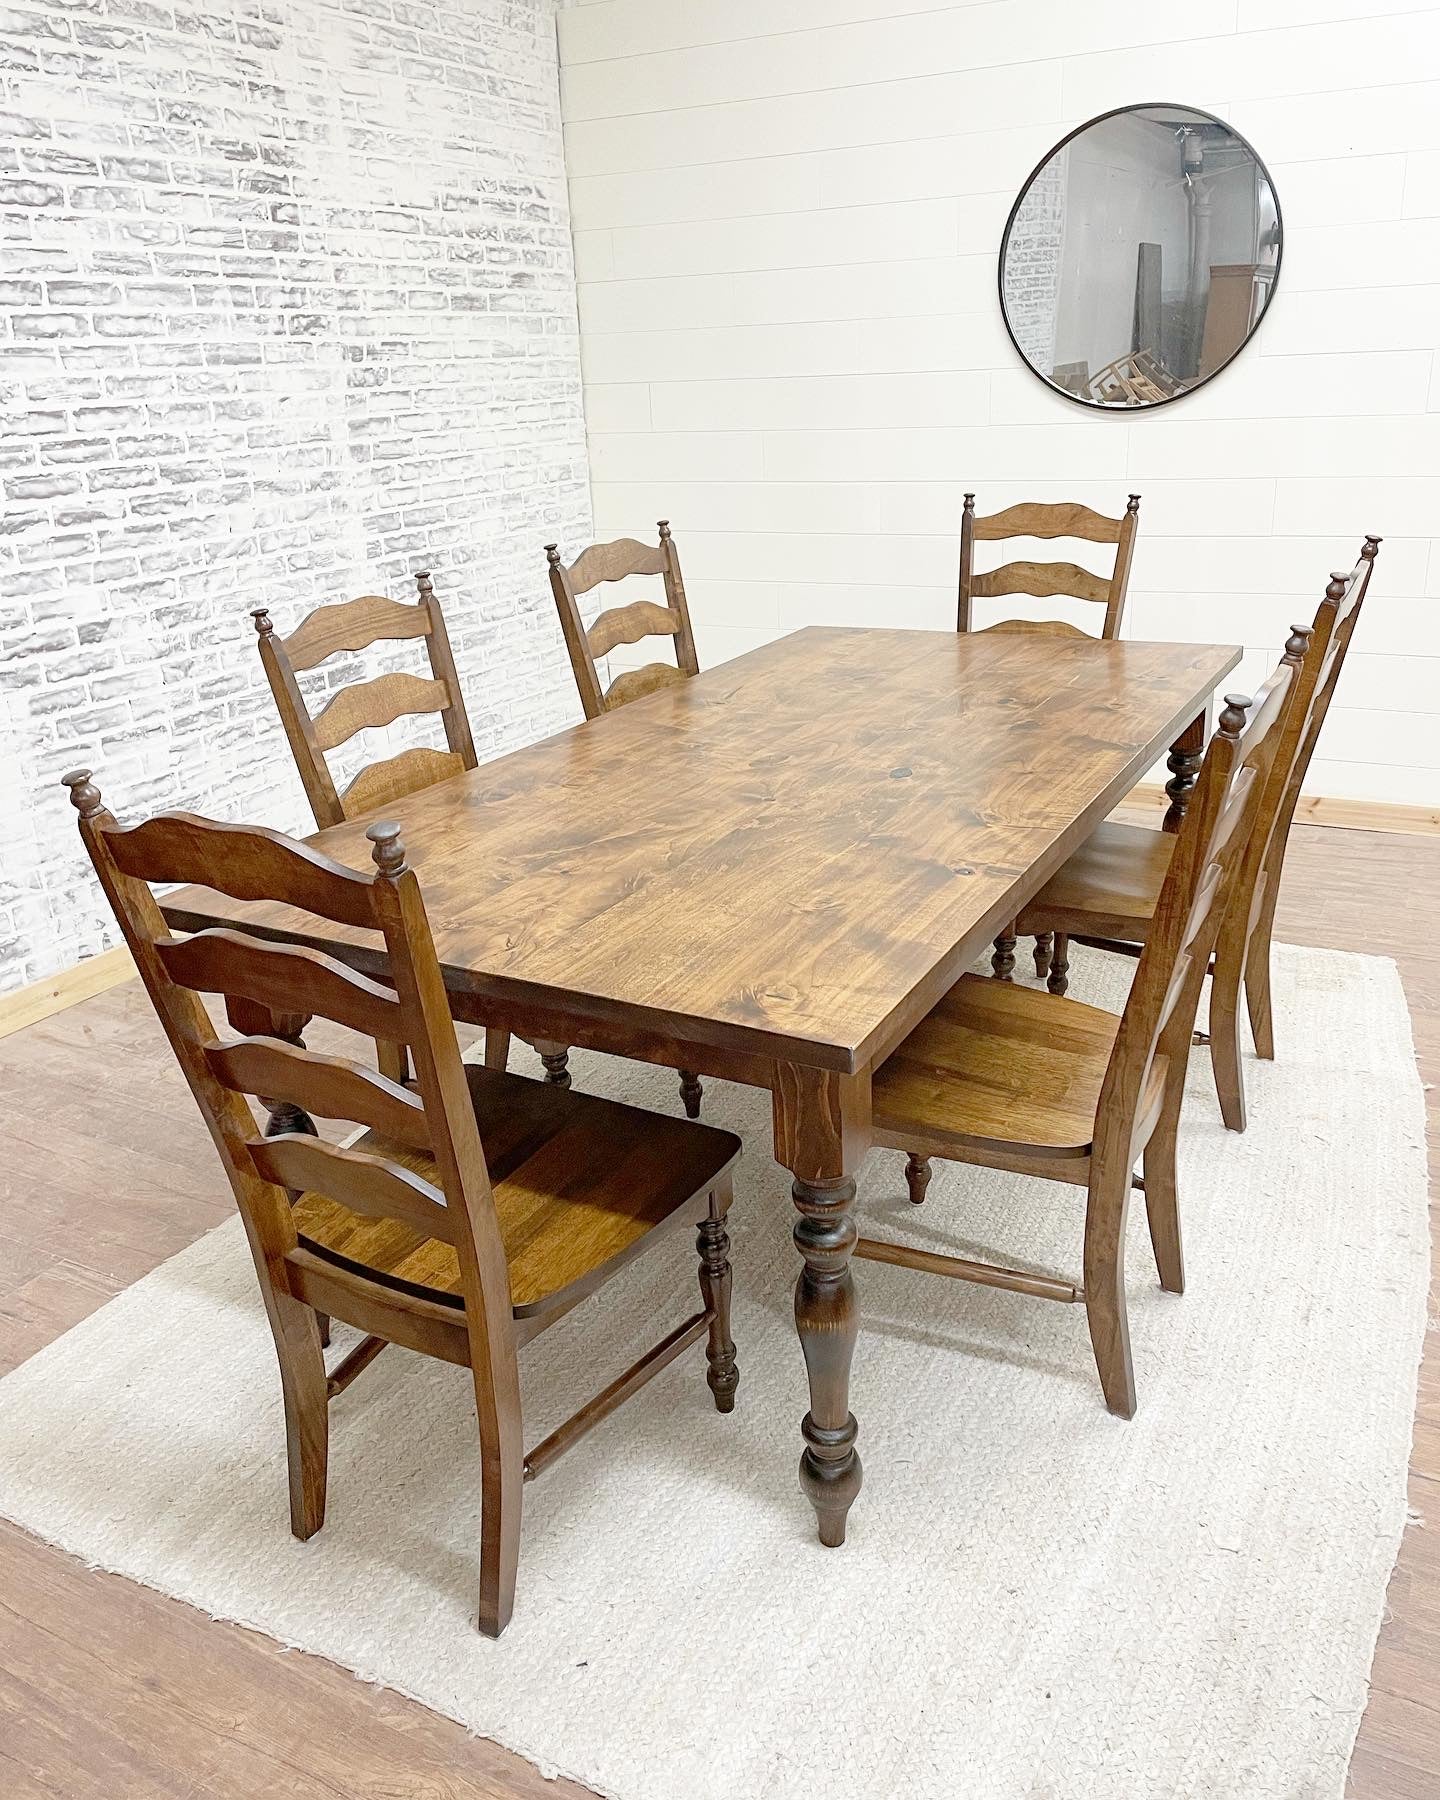 Pictured is a 7' x 42" Rustic Alder top with Pine Legs with Honey stain. Pictured with 6 Maine Ladder Back Chairs.